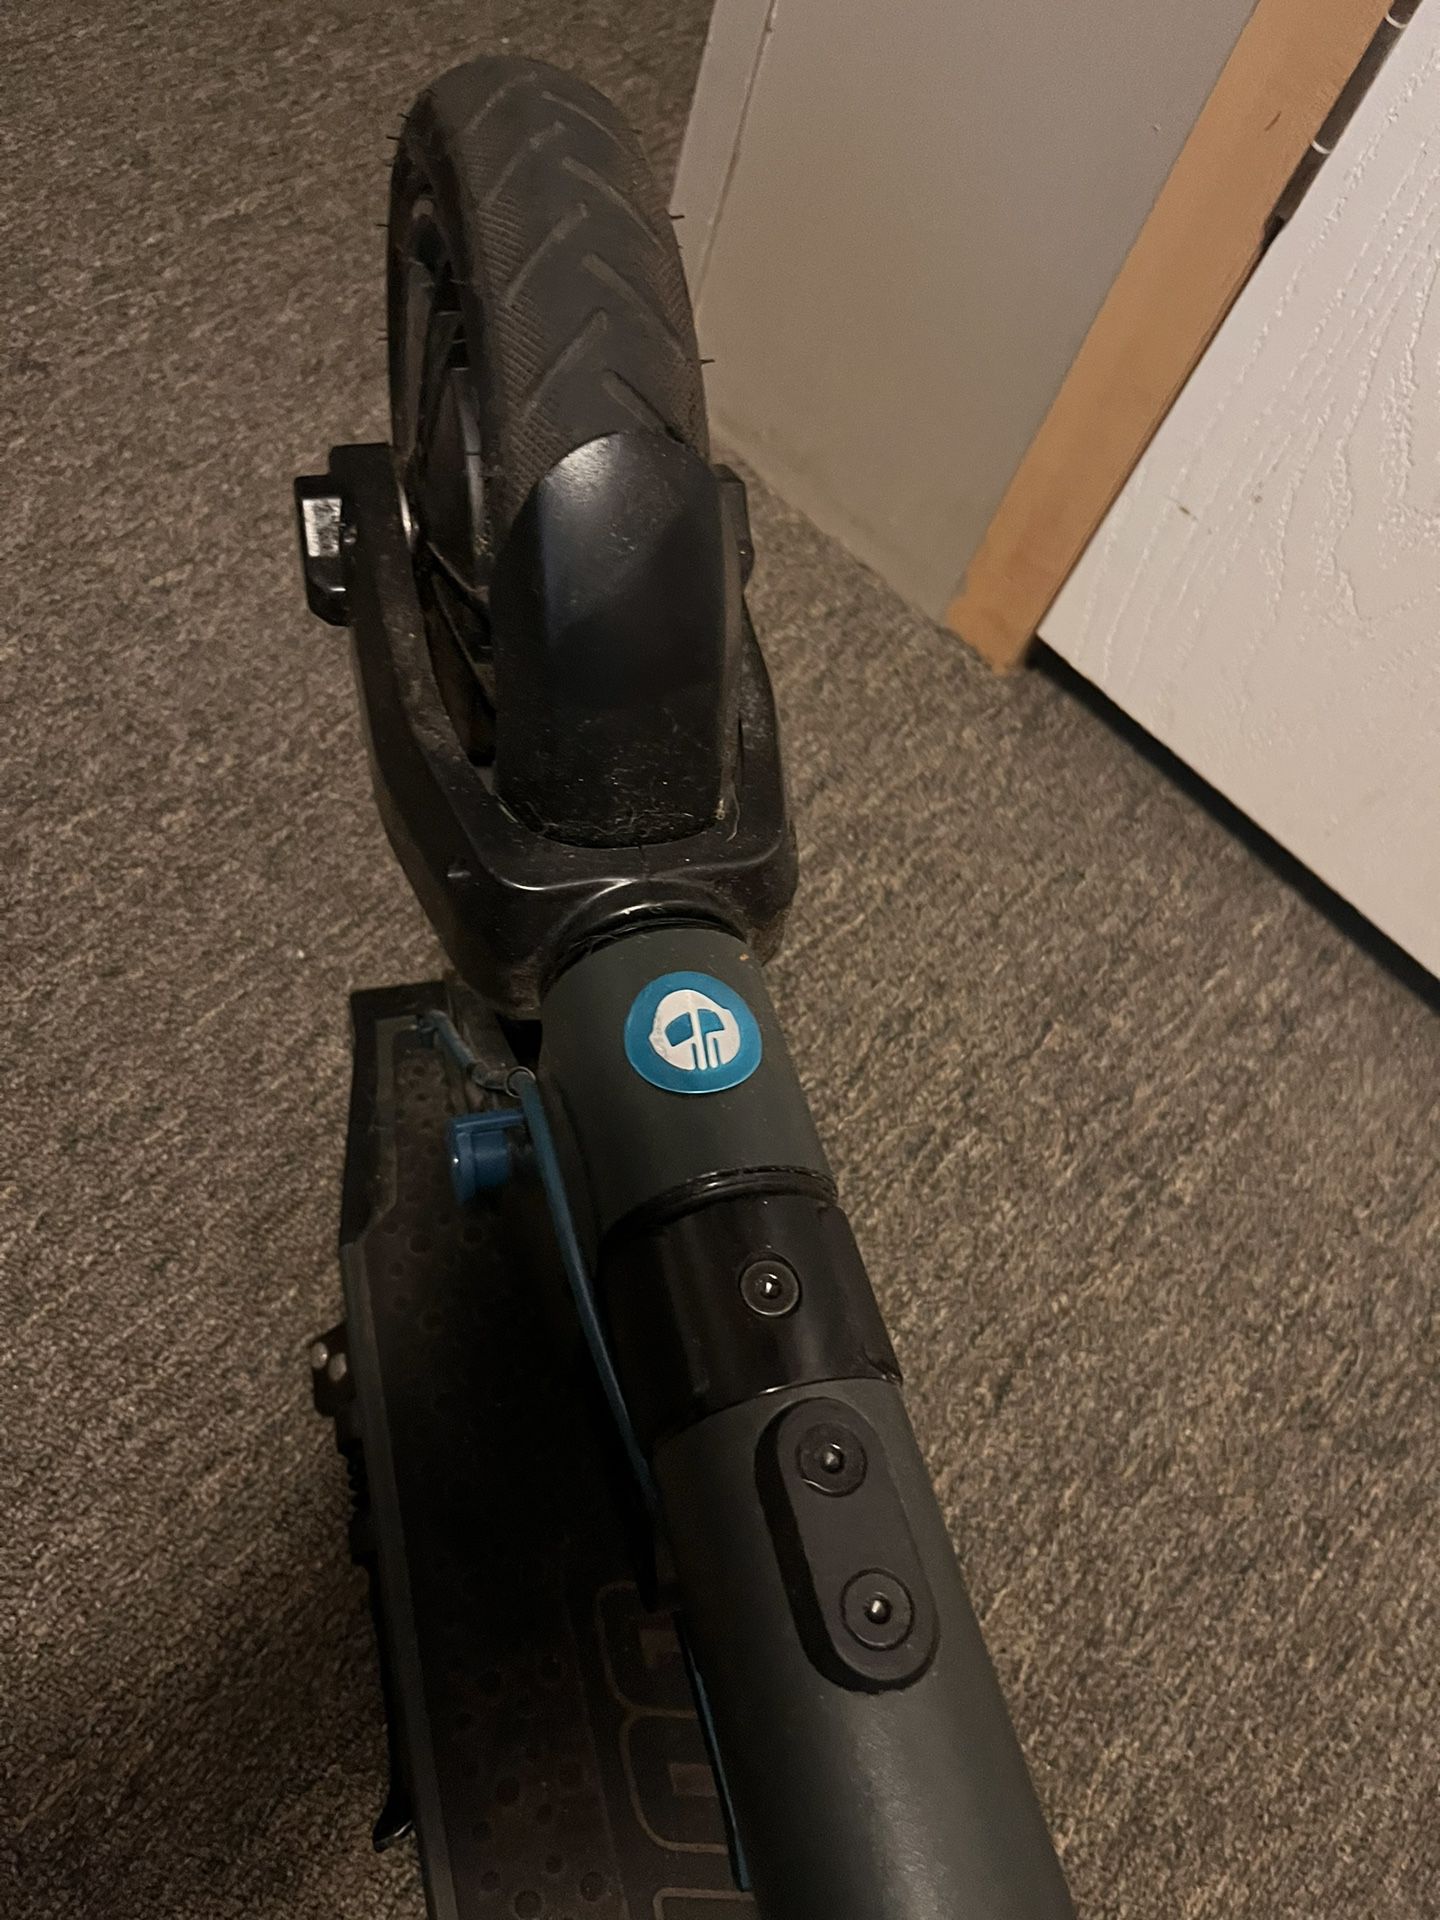 GOTRAX ELECTRIC SCOOTER